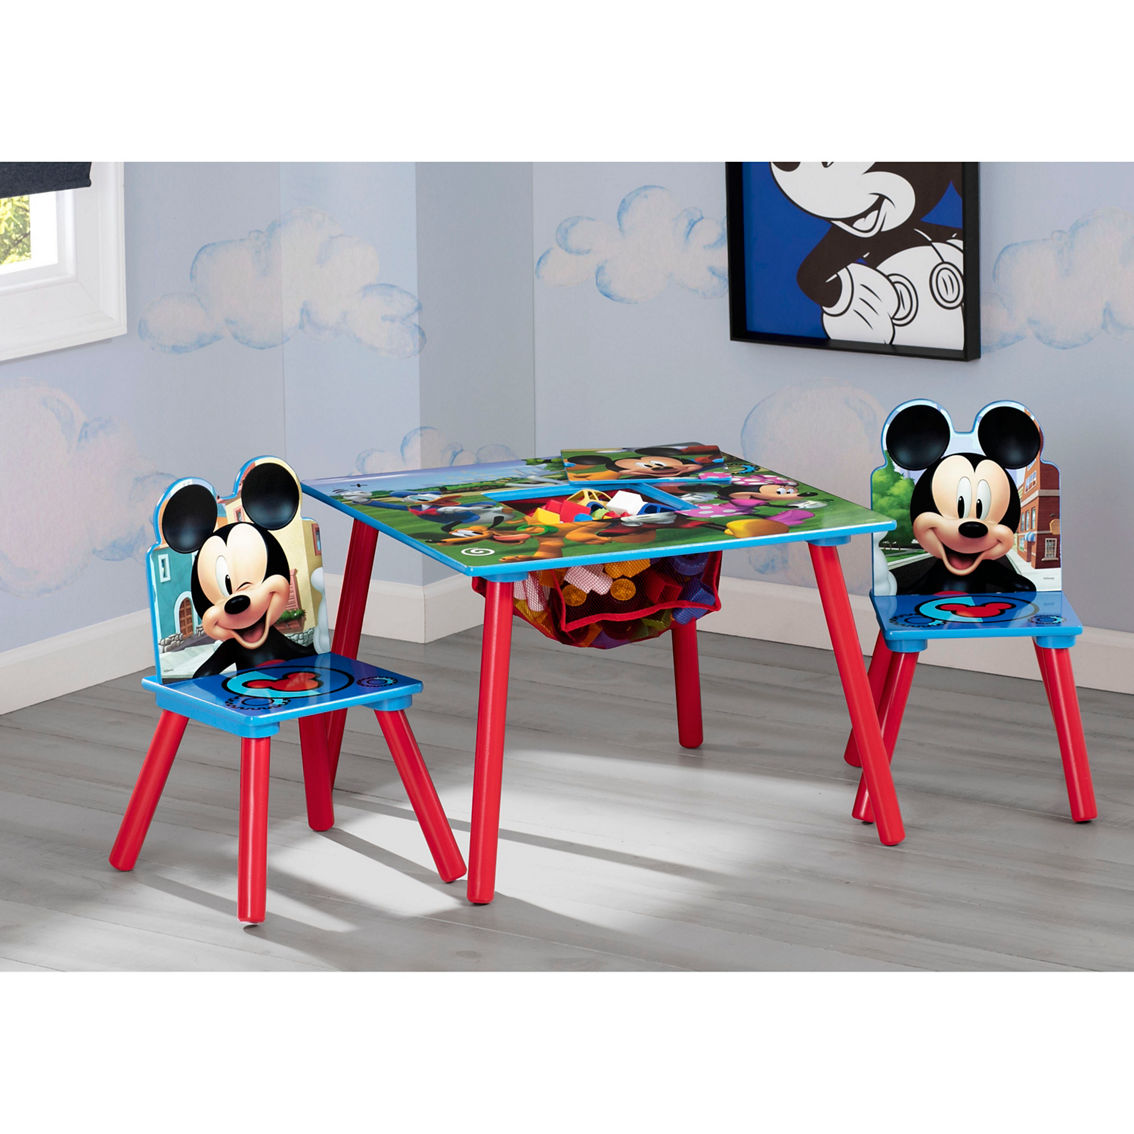 Disney Mickey Mouse Table and Chair Set with Storage - Image 5 of 5